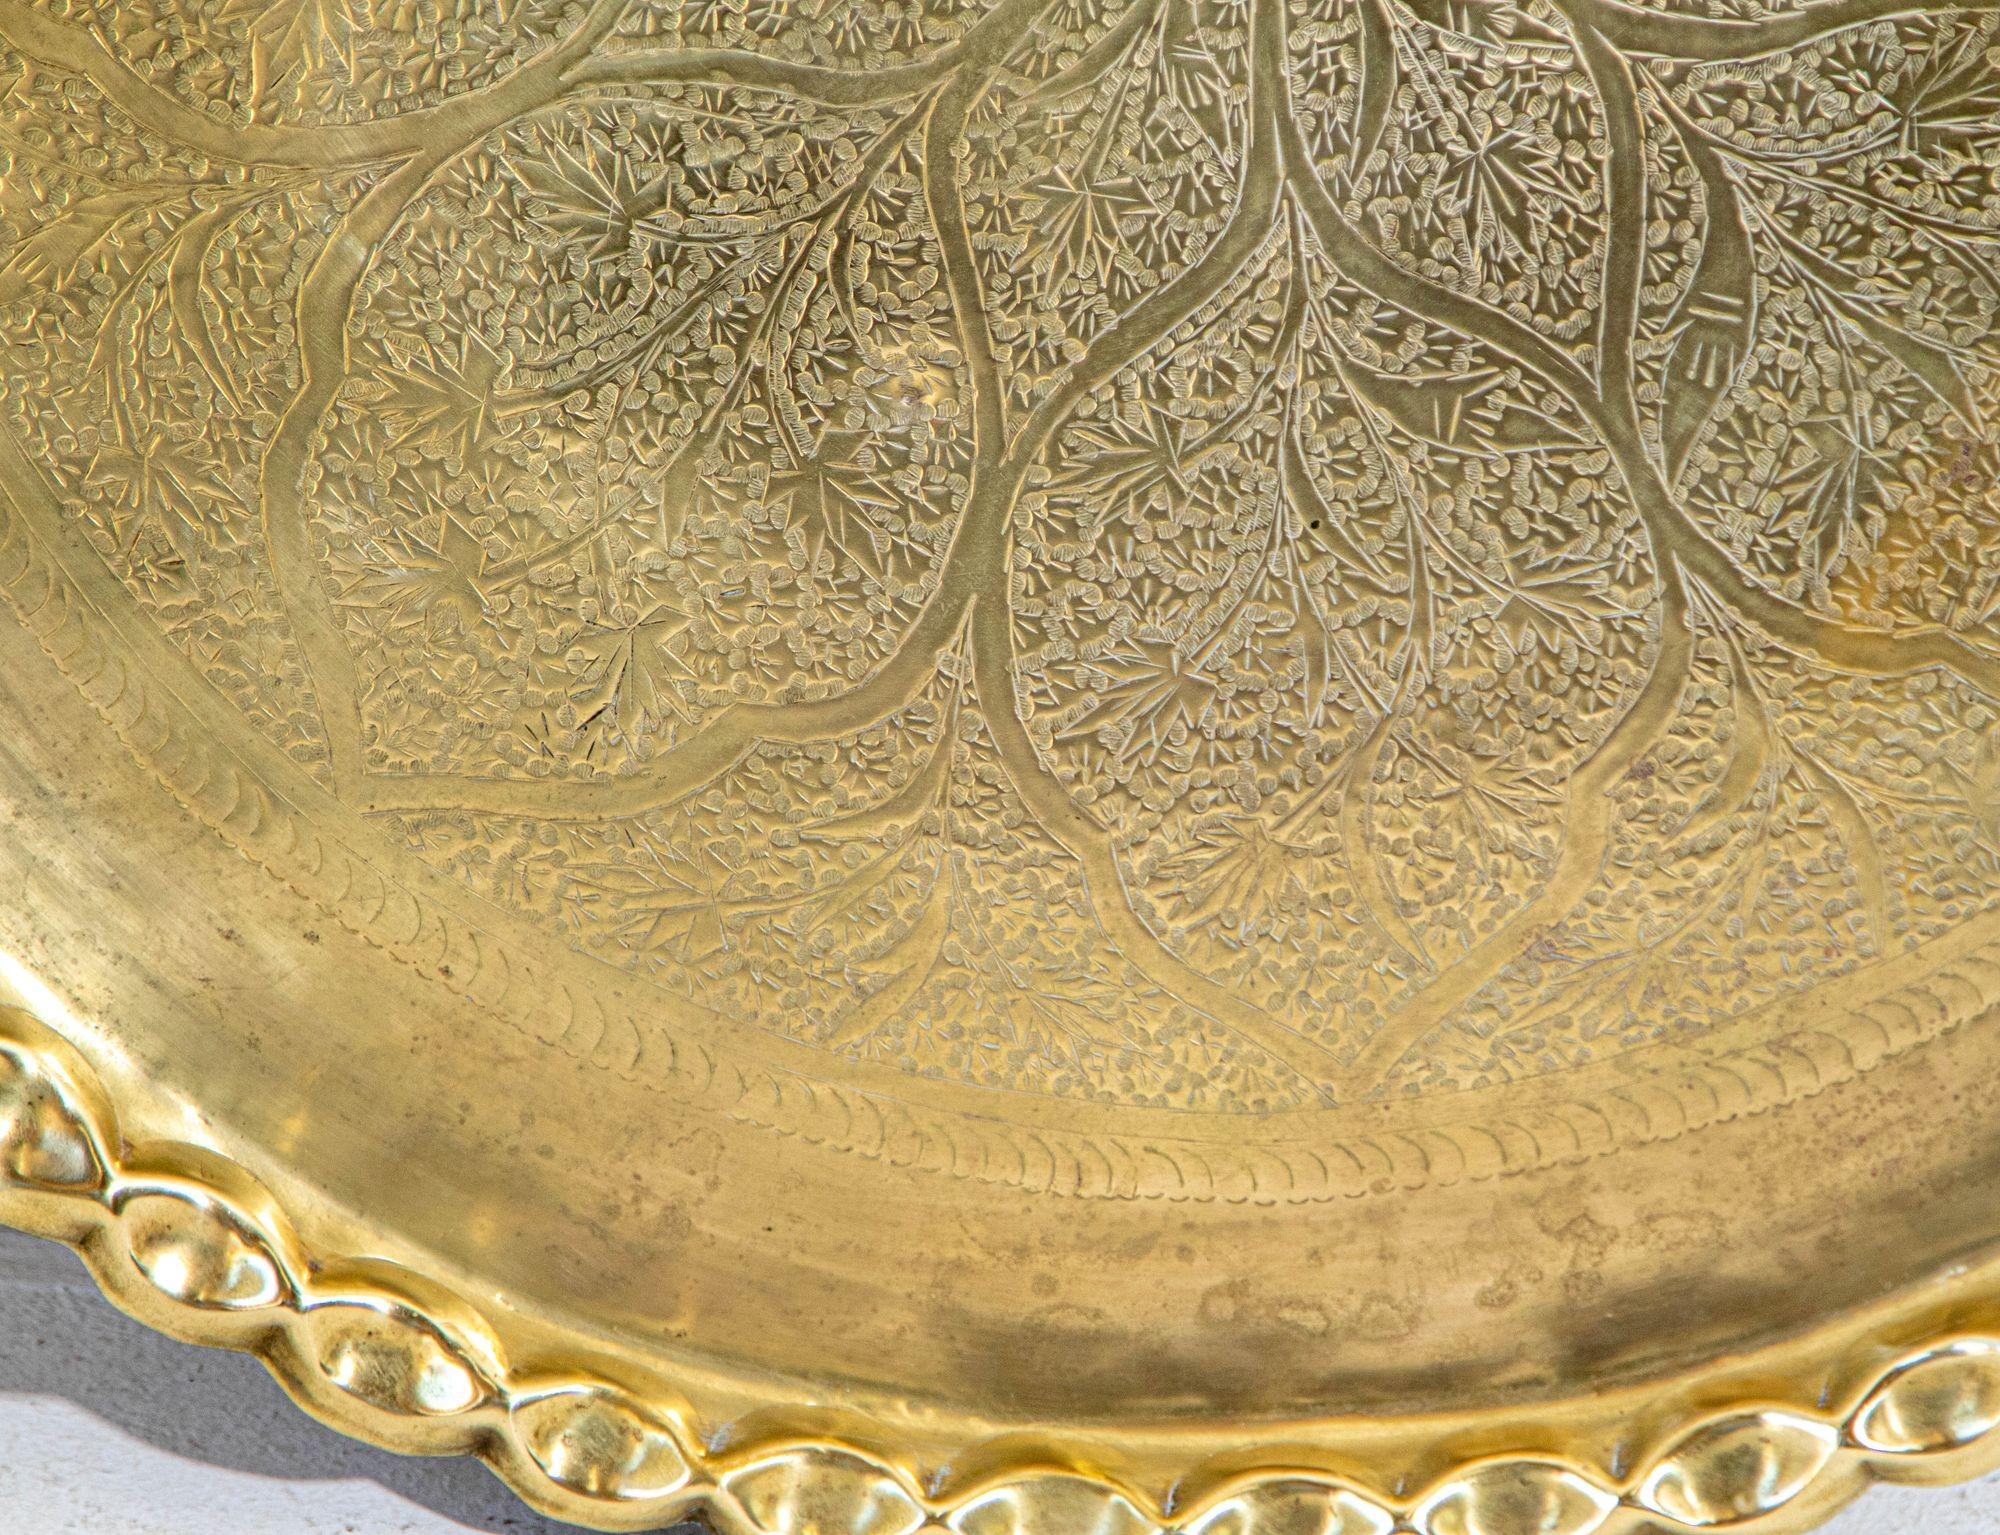 Islamic Asian Mughal Rajasthani Large Polished Round Brass Tray with Crest Edges 30 in. For Sale